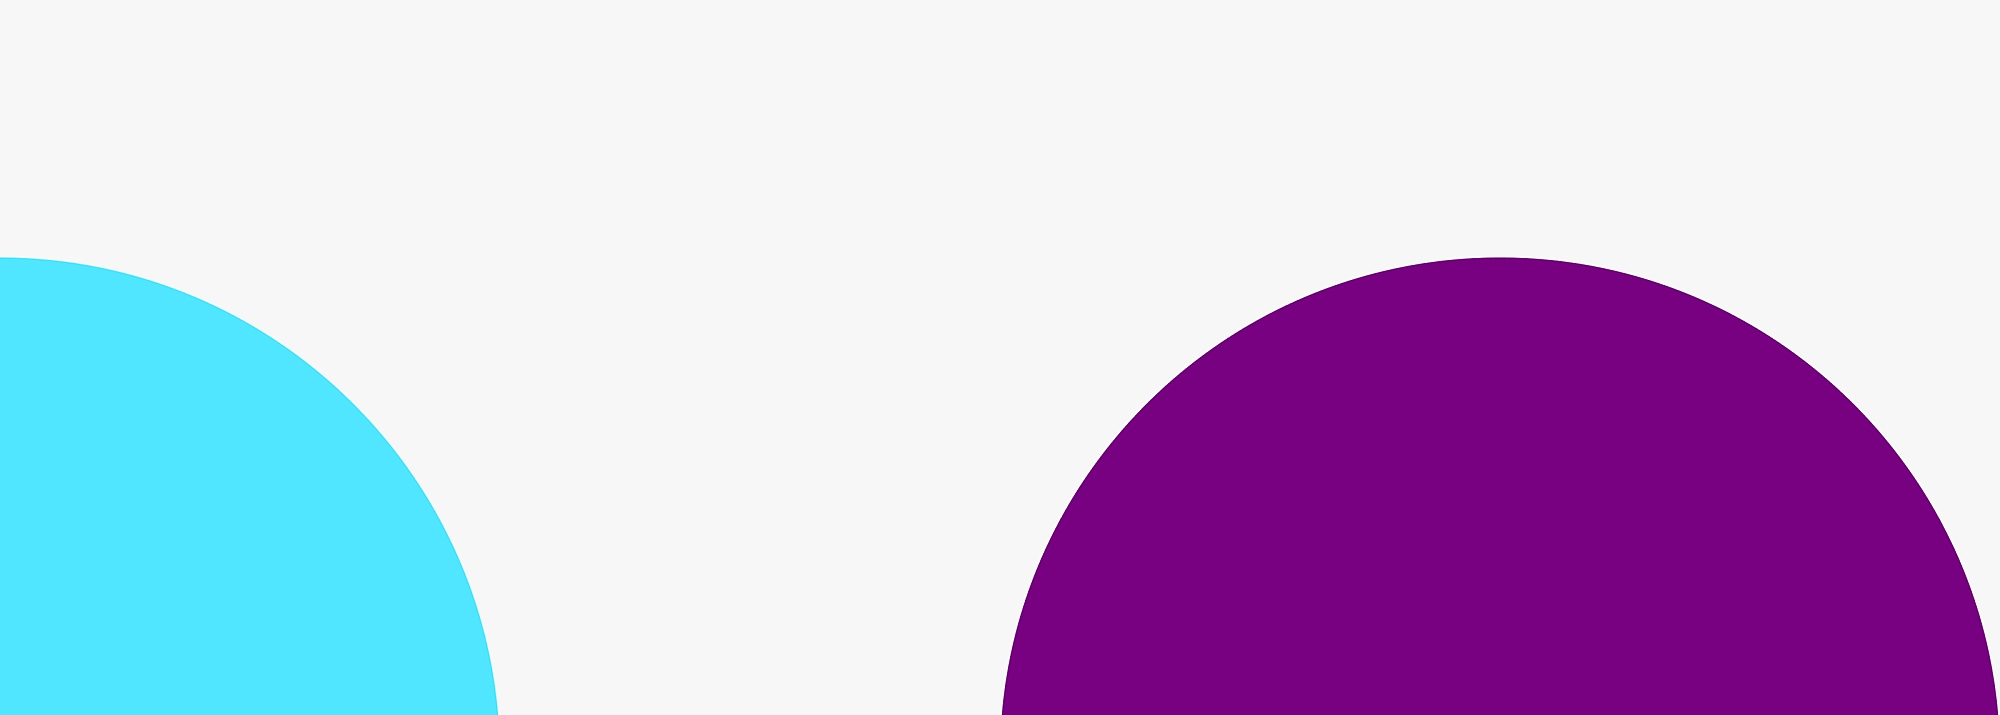 One quarter of a light blue circle and one half of a purple circle on a light gray background